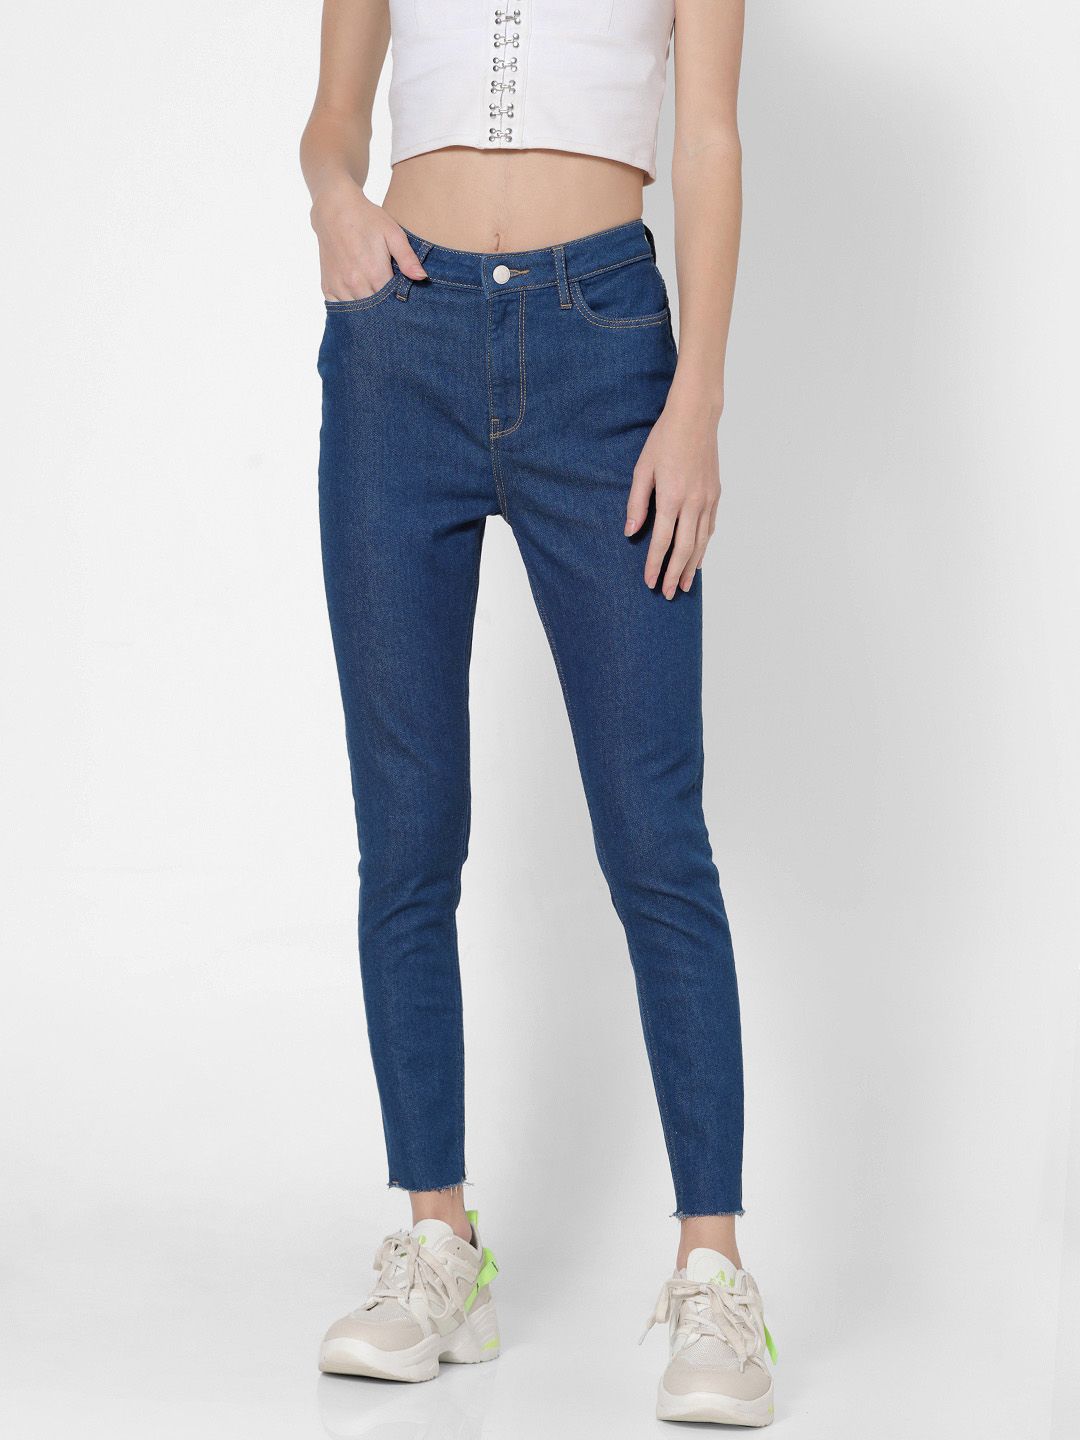 ONLY Women Blue Skinny Fit Jeans Price in India